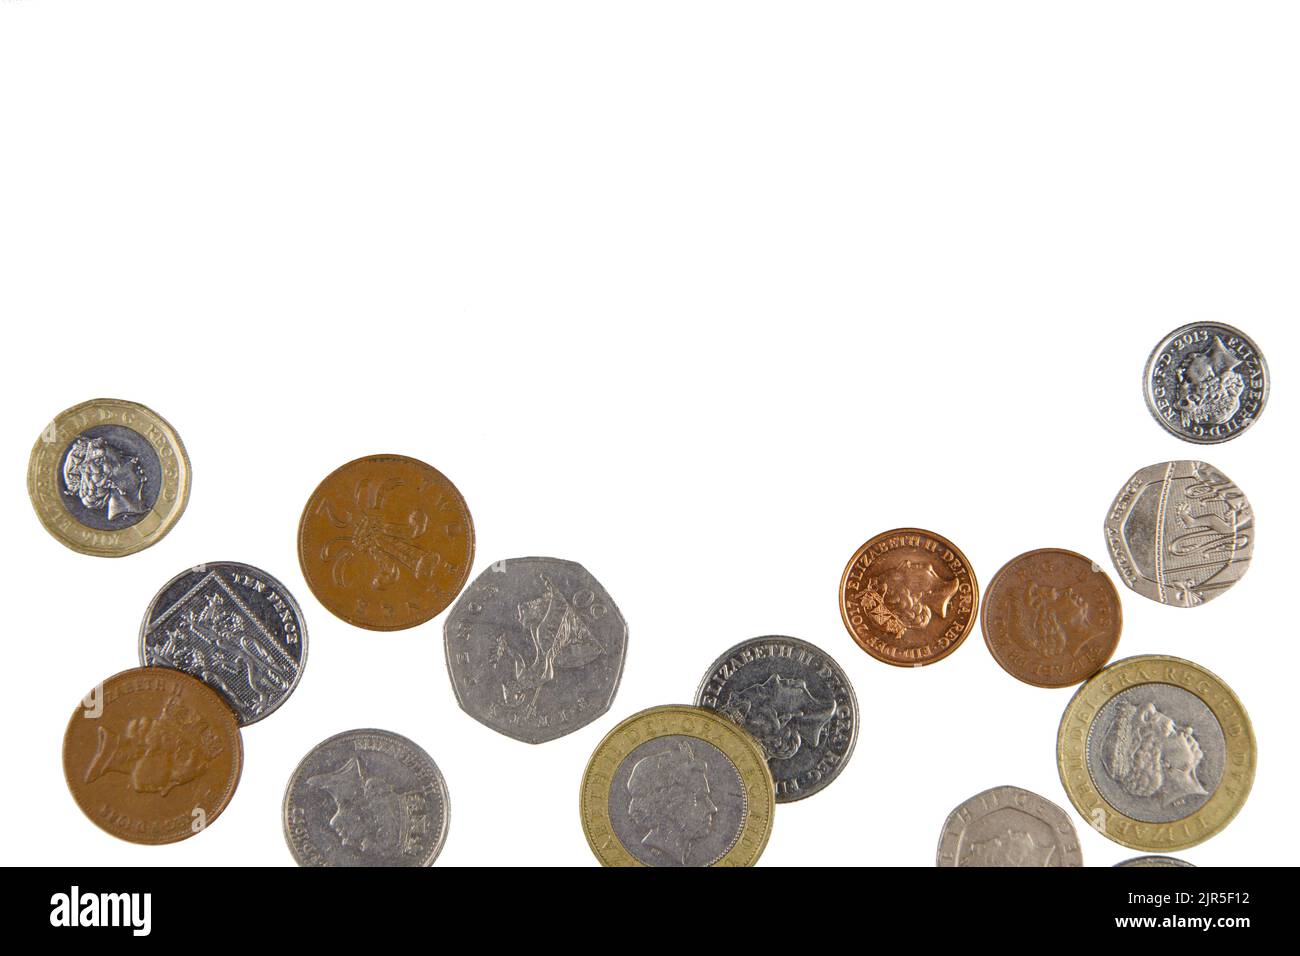 A Flat Lay background of British Coins isolated on a white background with copy space. Stock Photo